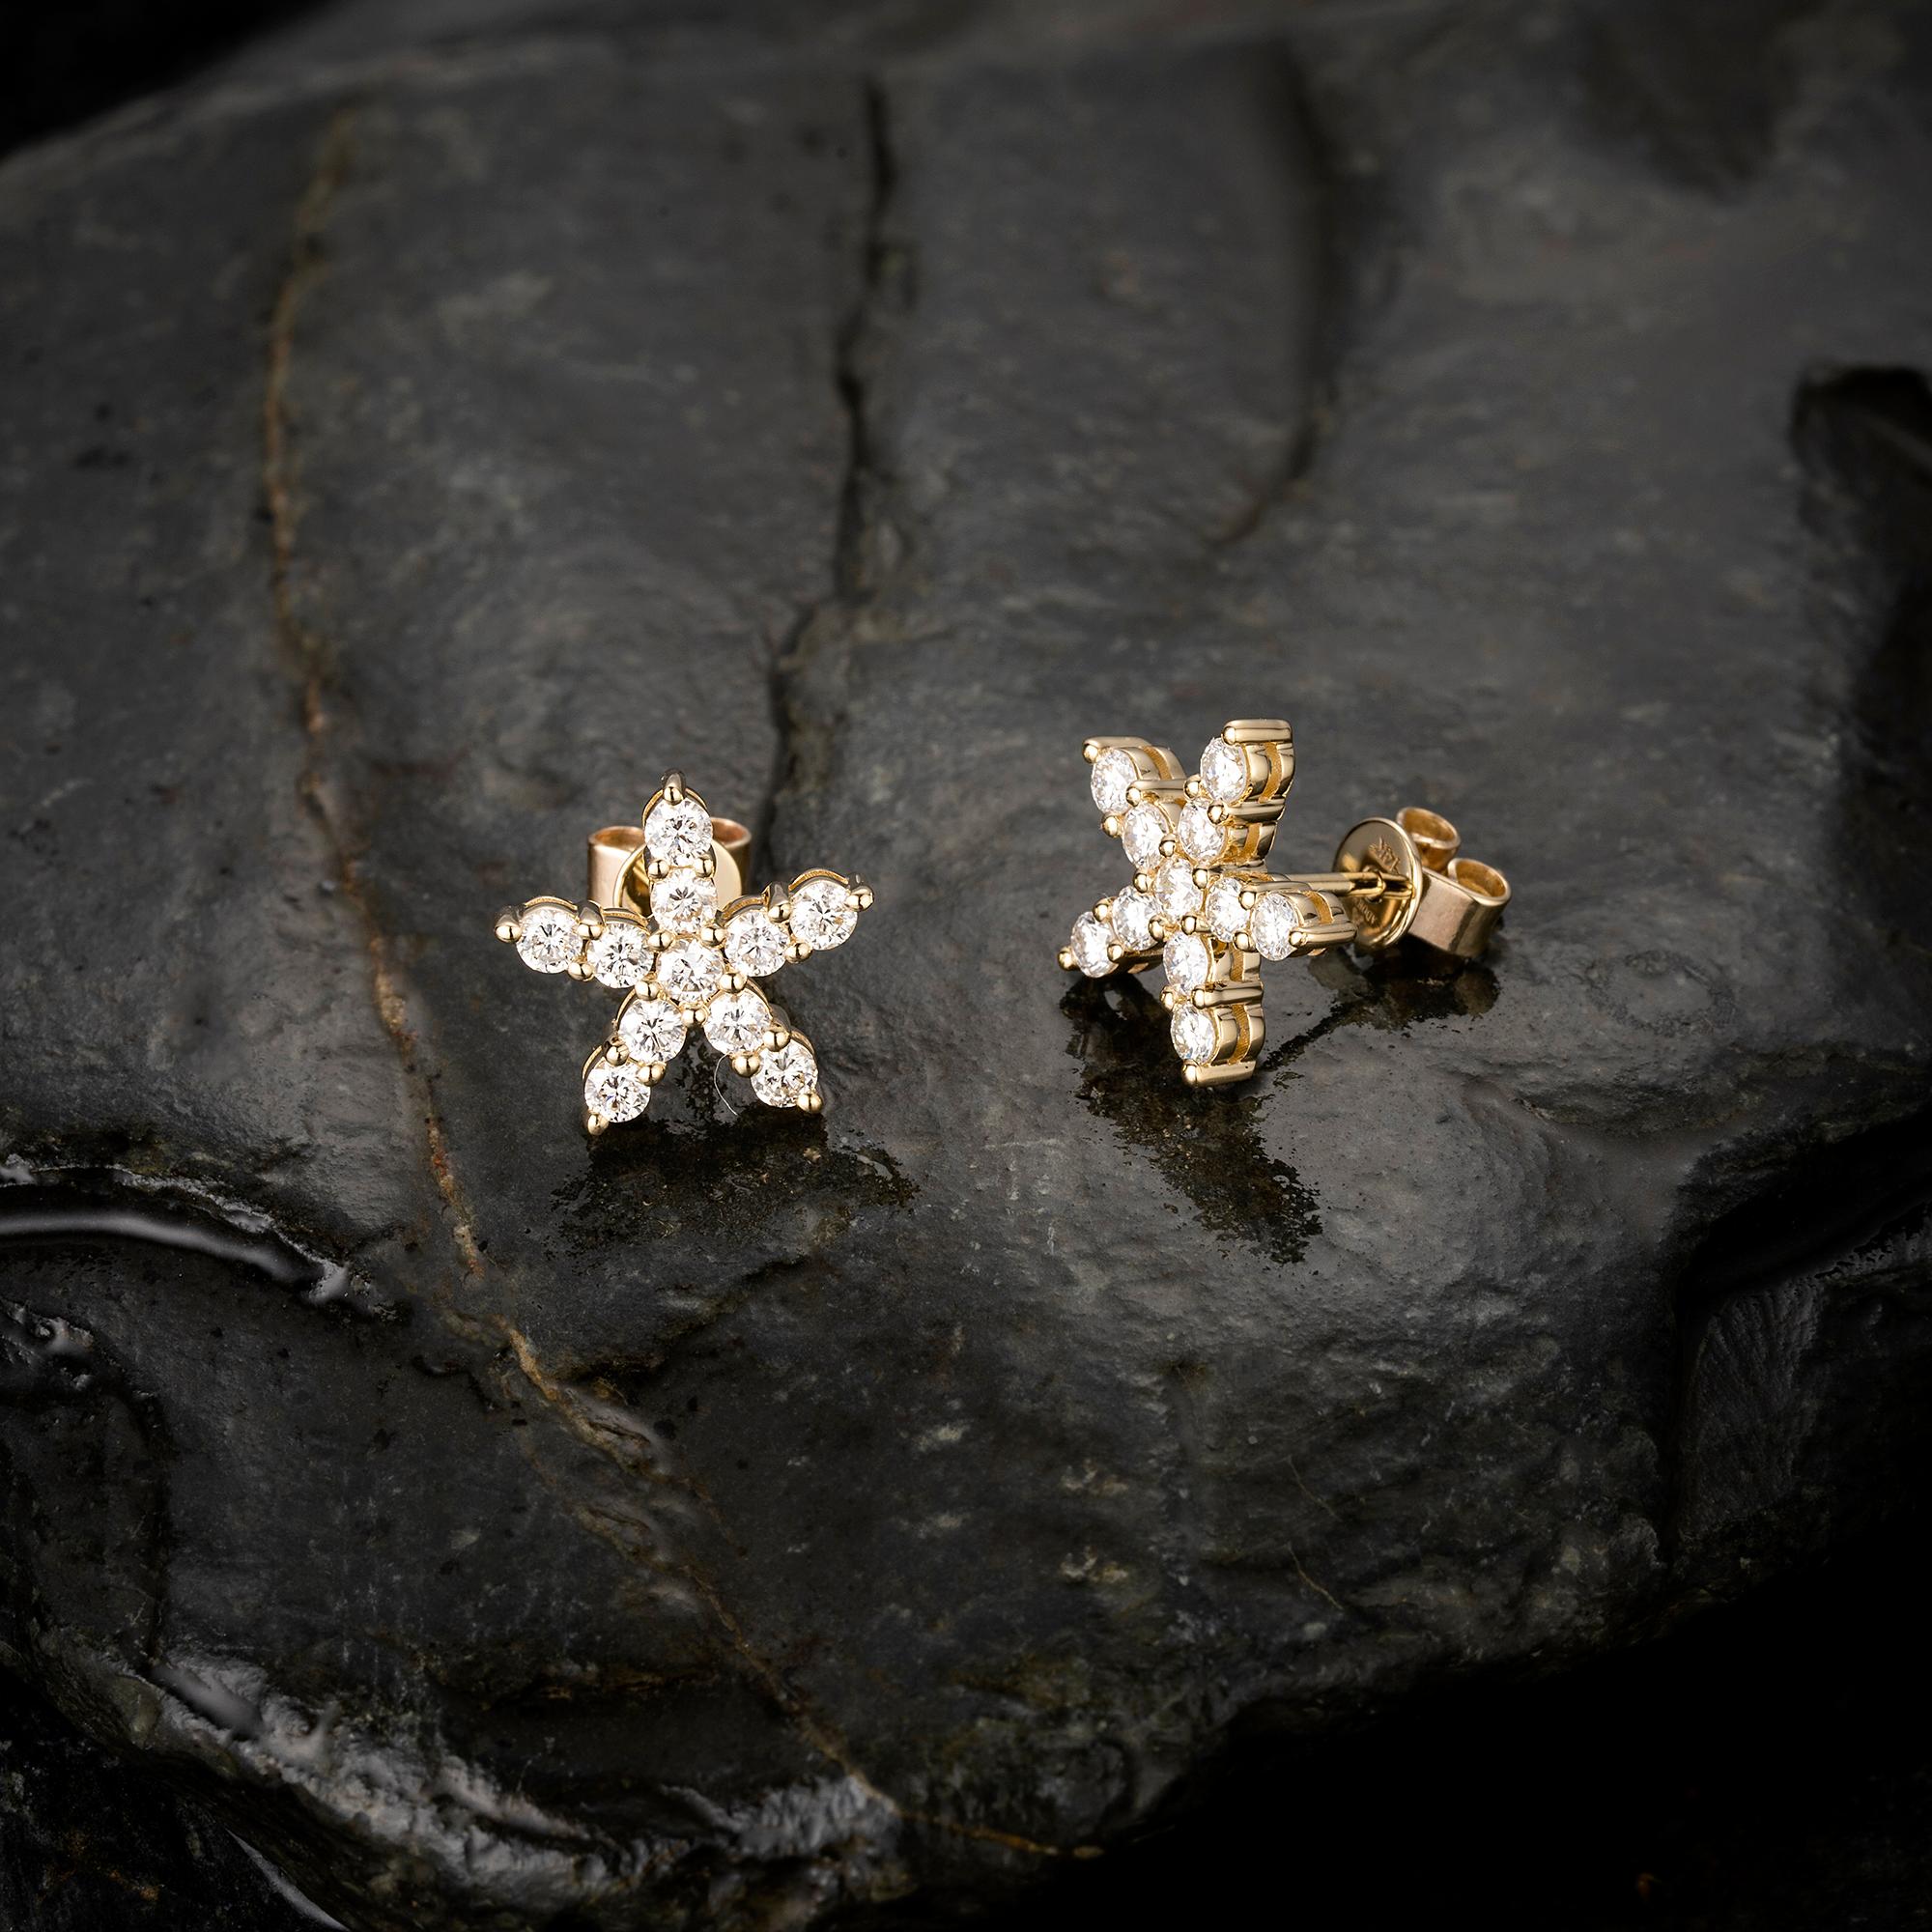 Earring Information
Diamond Type : Natural Diamond
Metal : 14K
Metal Color : Yellow Gold
Diamond Carat Weight : 2.50ttcw
Diamond Color Clarity : G-SI
Weight : 11.5mm

JEWELRY CARE
Over the course of time, body oil and skin products can collect on